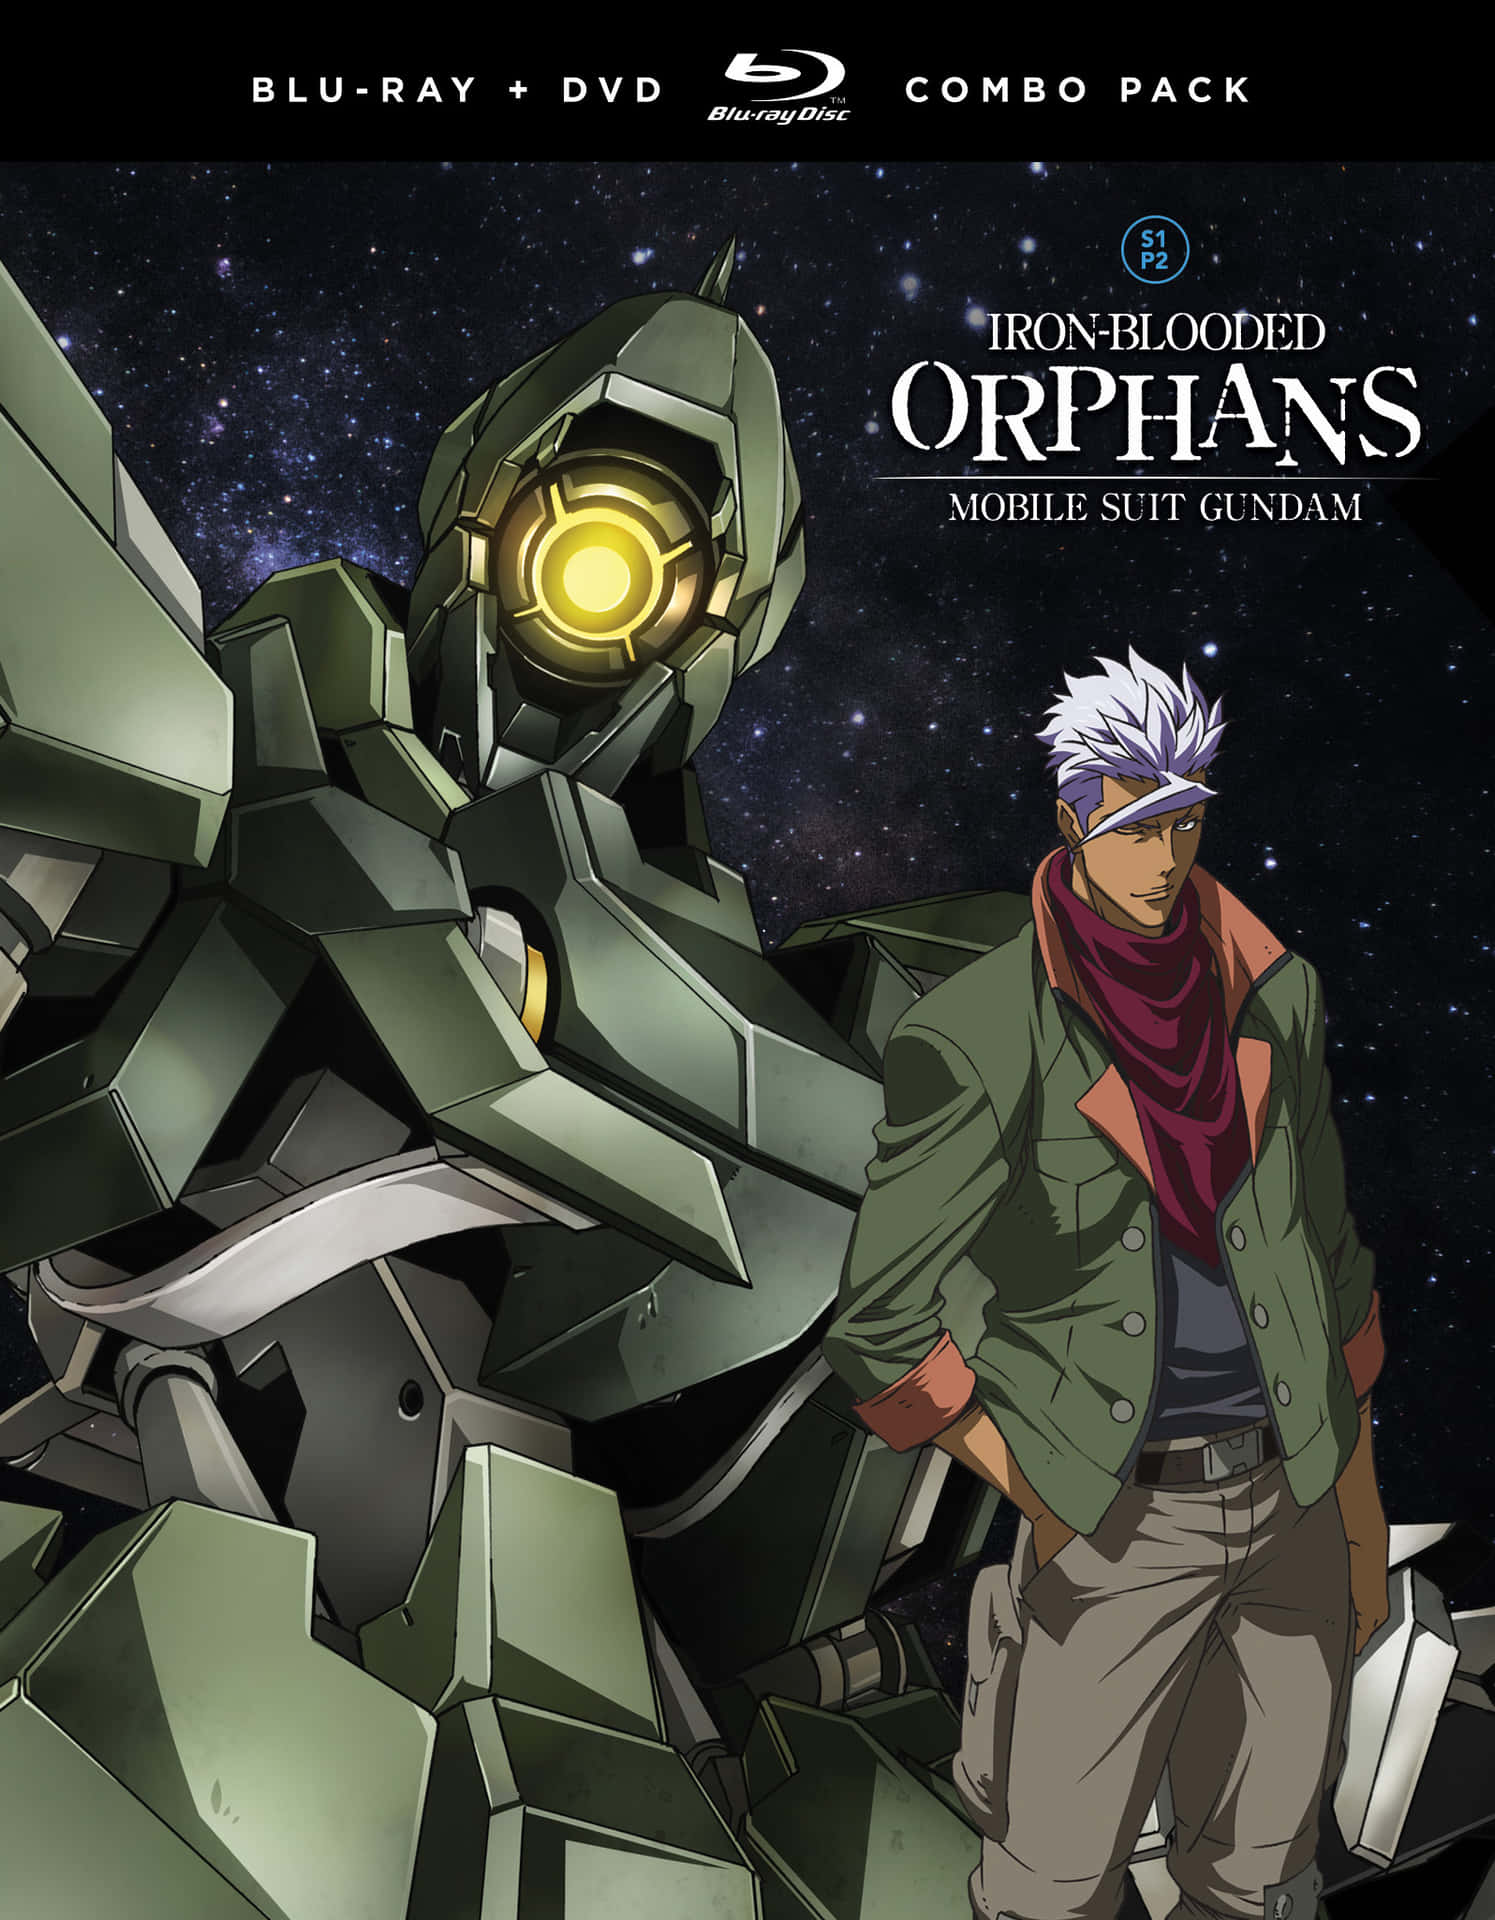 "The Heroic Orphans - Mobile Suit Gundam Iron-blooded Orphans" Wallpaper